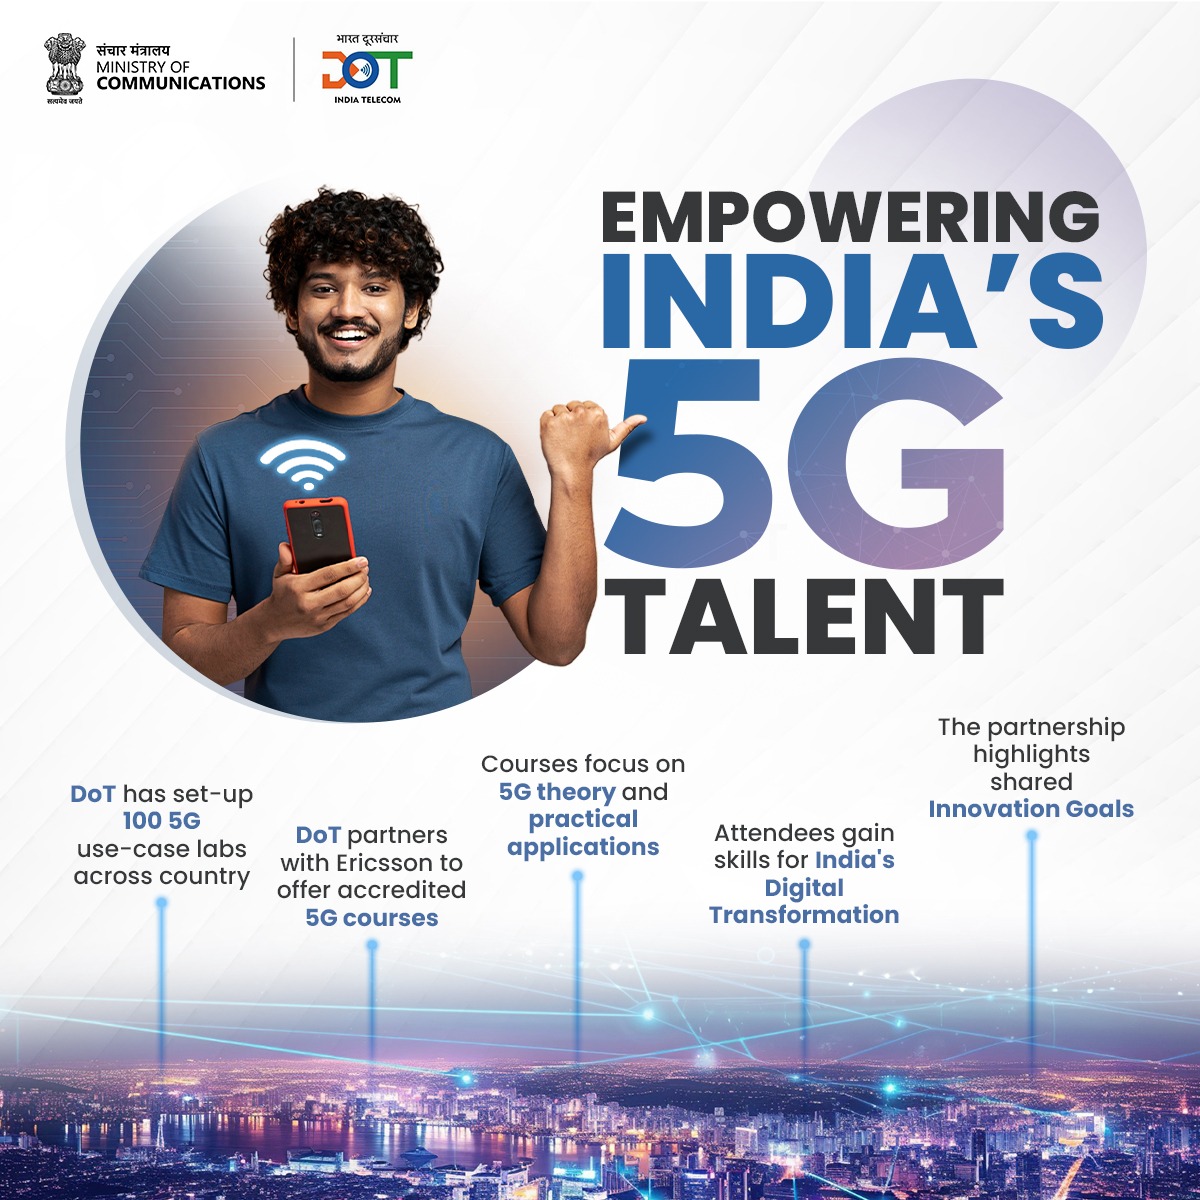 Advancing Youth with #futureready skills! with @DoT_India setting up 100 5G use-case labs acroos country and partnering with @EricssonIndia for offering accredited courses on 5G, shaping tomorrow’s tech leaders. #5GEducation #TechLeadership